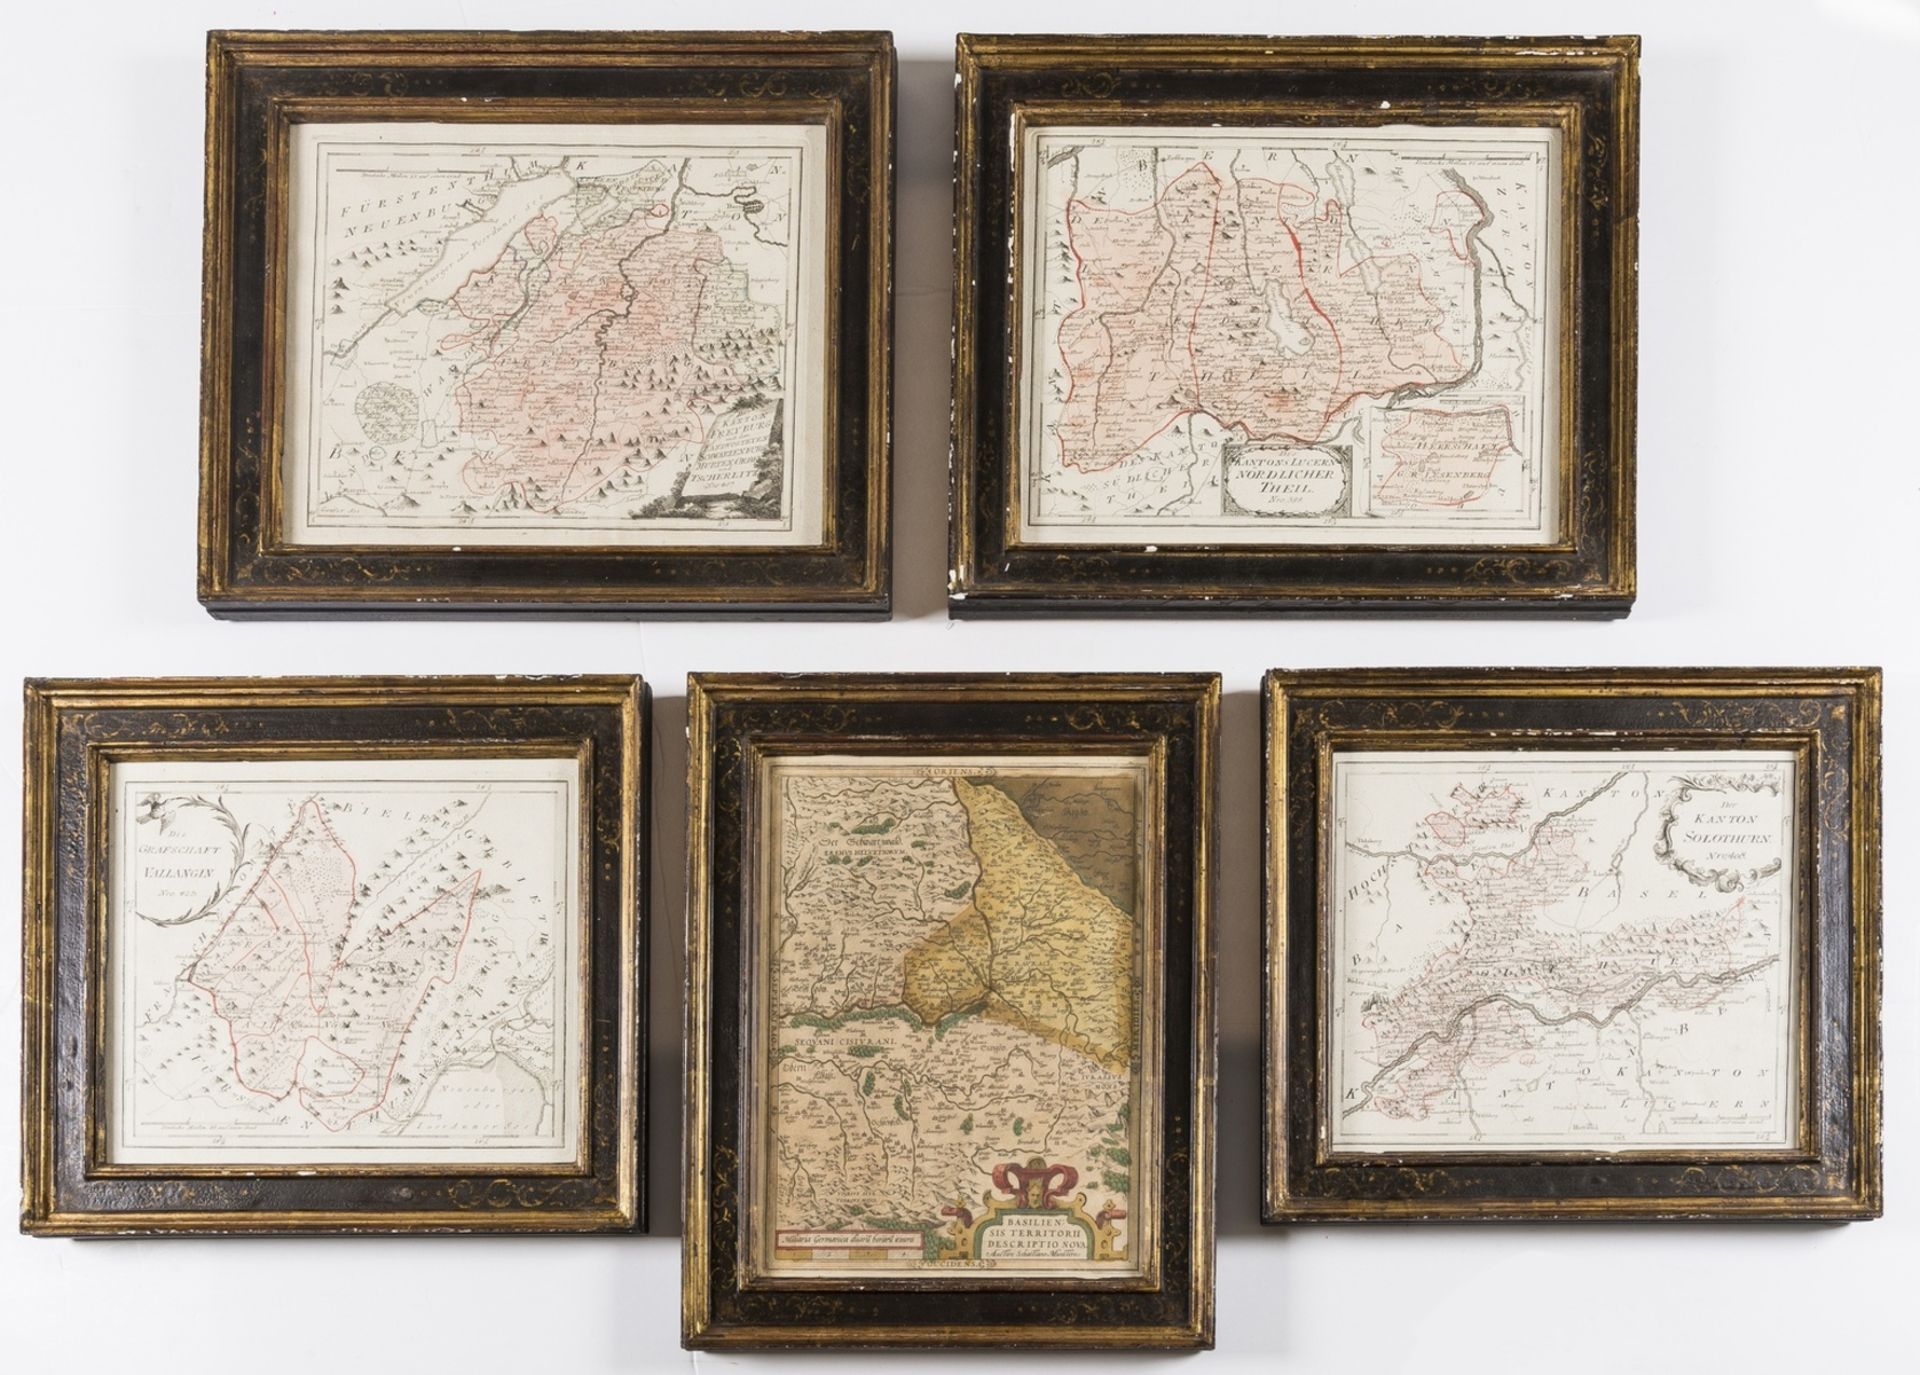 Switzerland.- Collection of 5 maps in cassetta-style frames, 17th to 19th century (5)